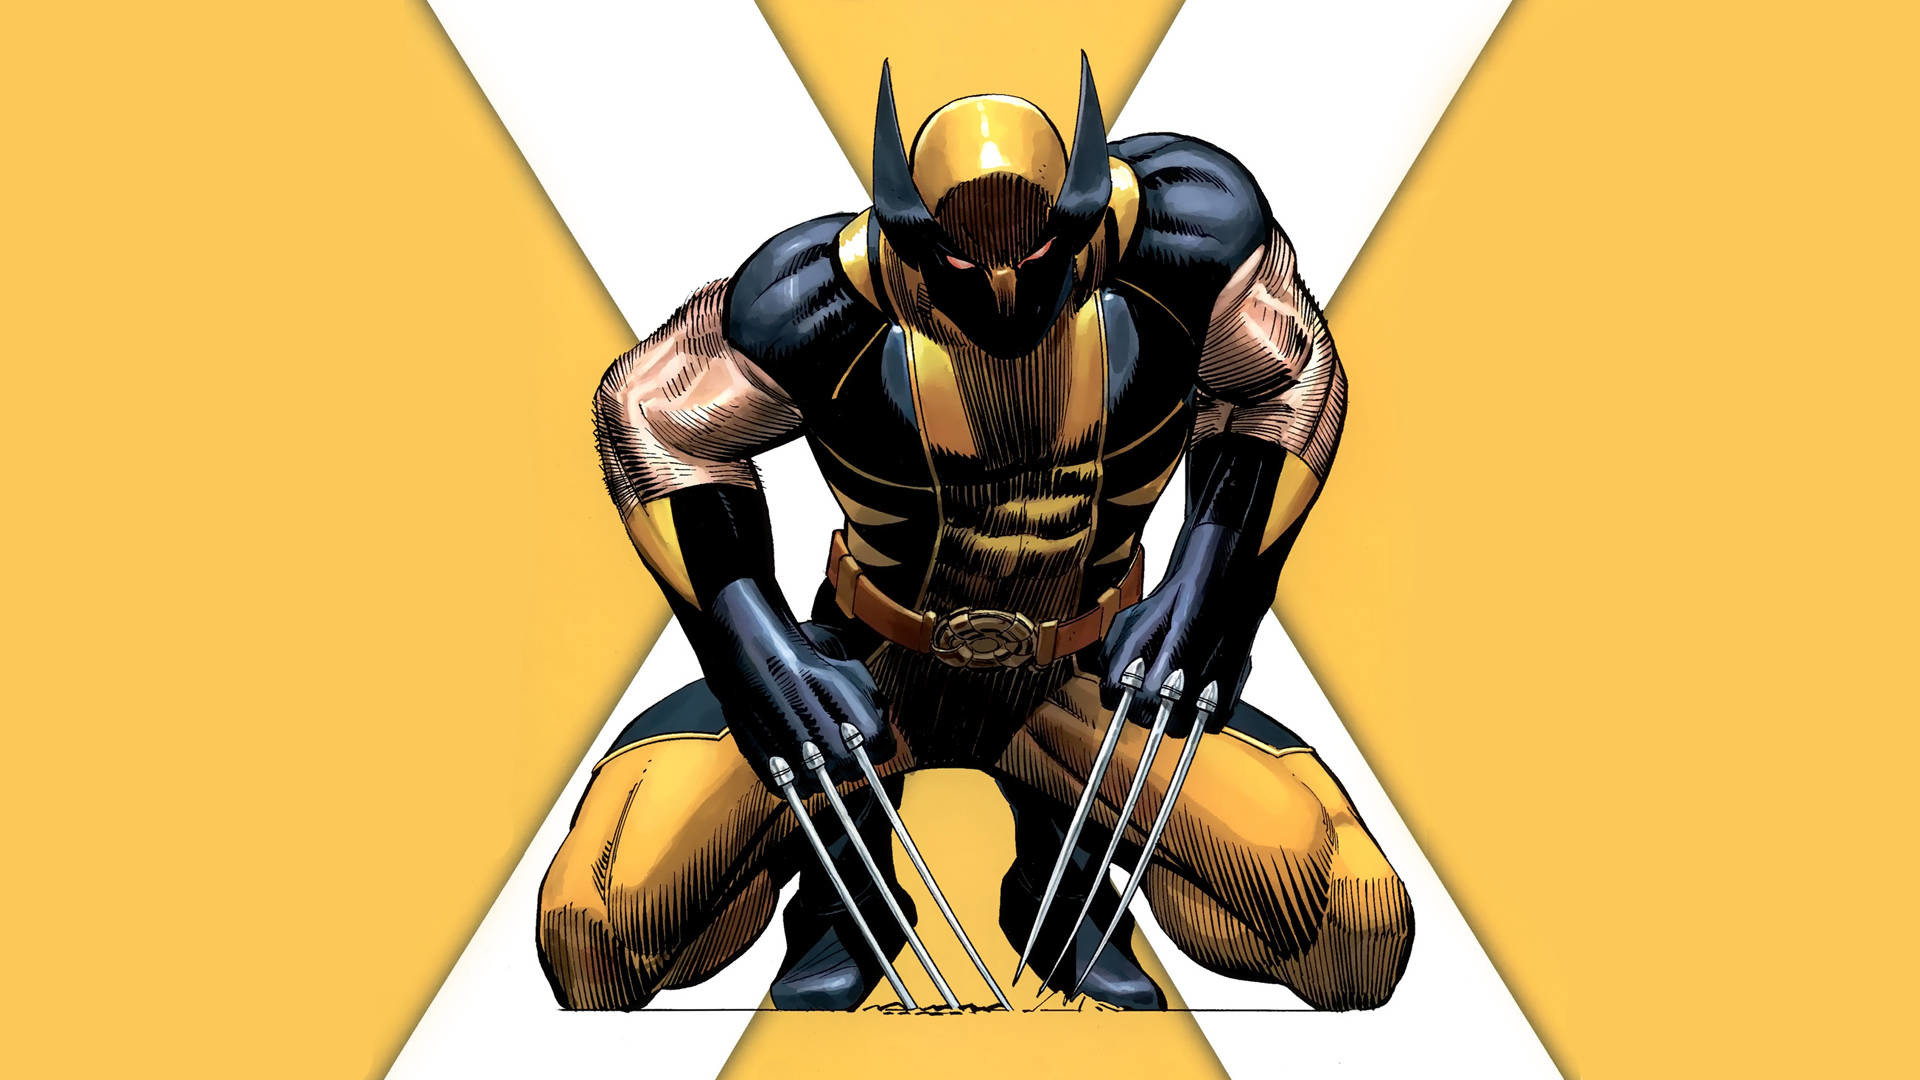 1920x1080 Wolverine images Wolverine vs Ultimate Wolverine HD wallpaper and .